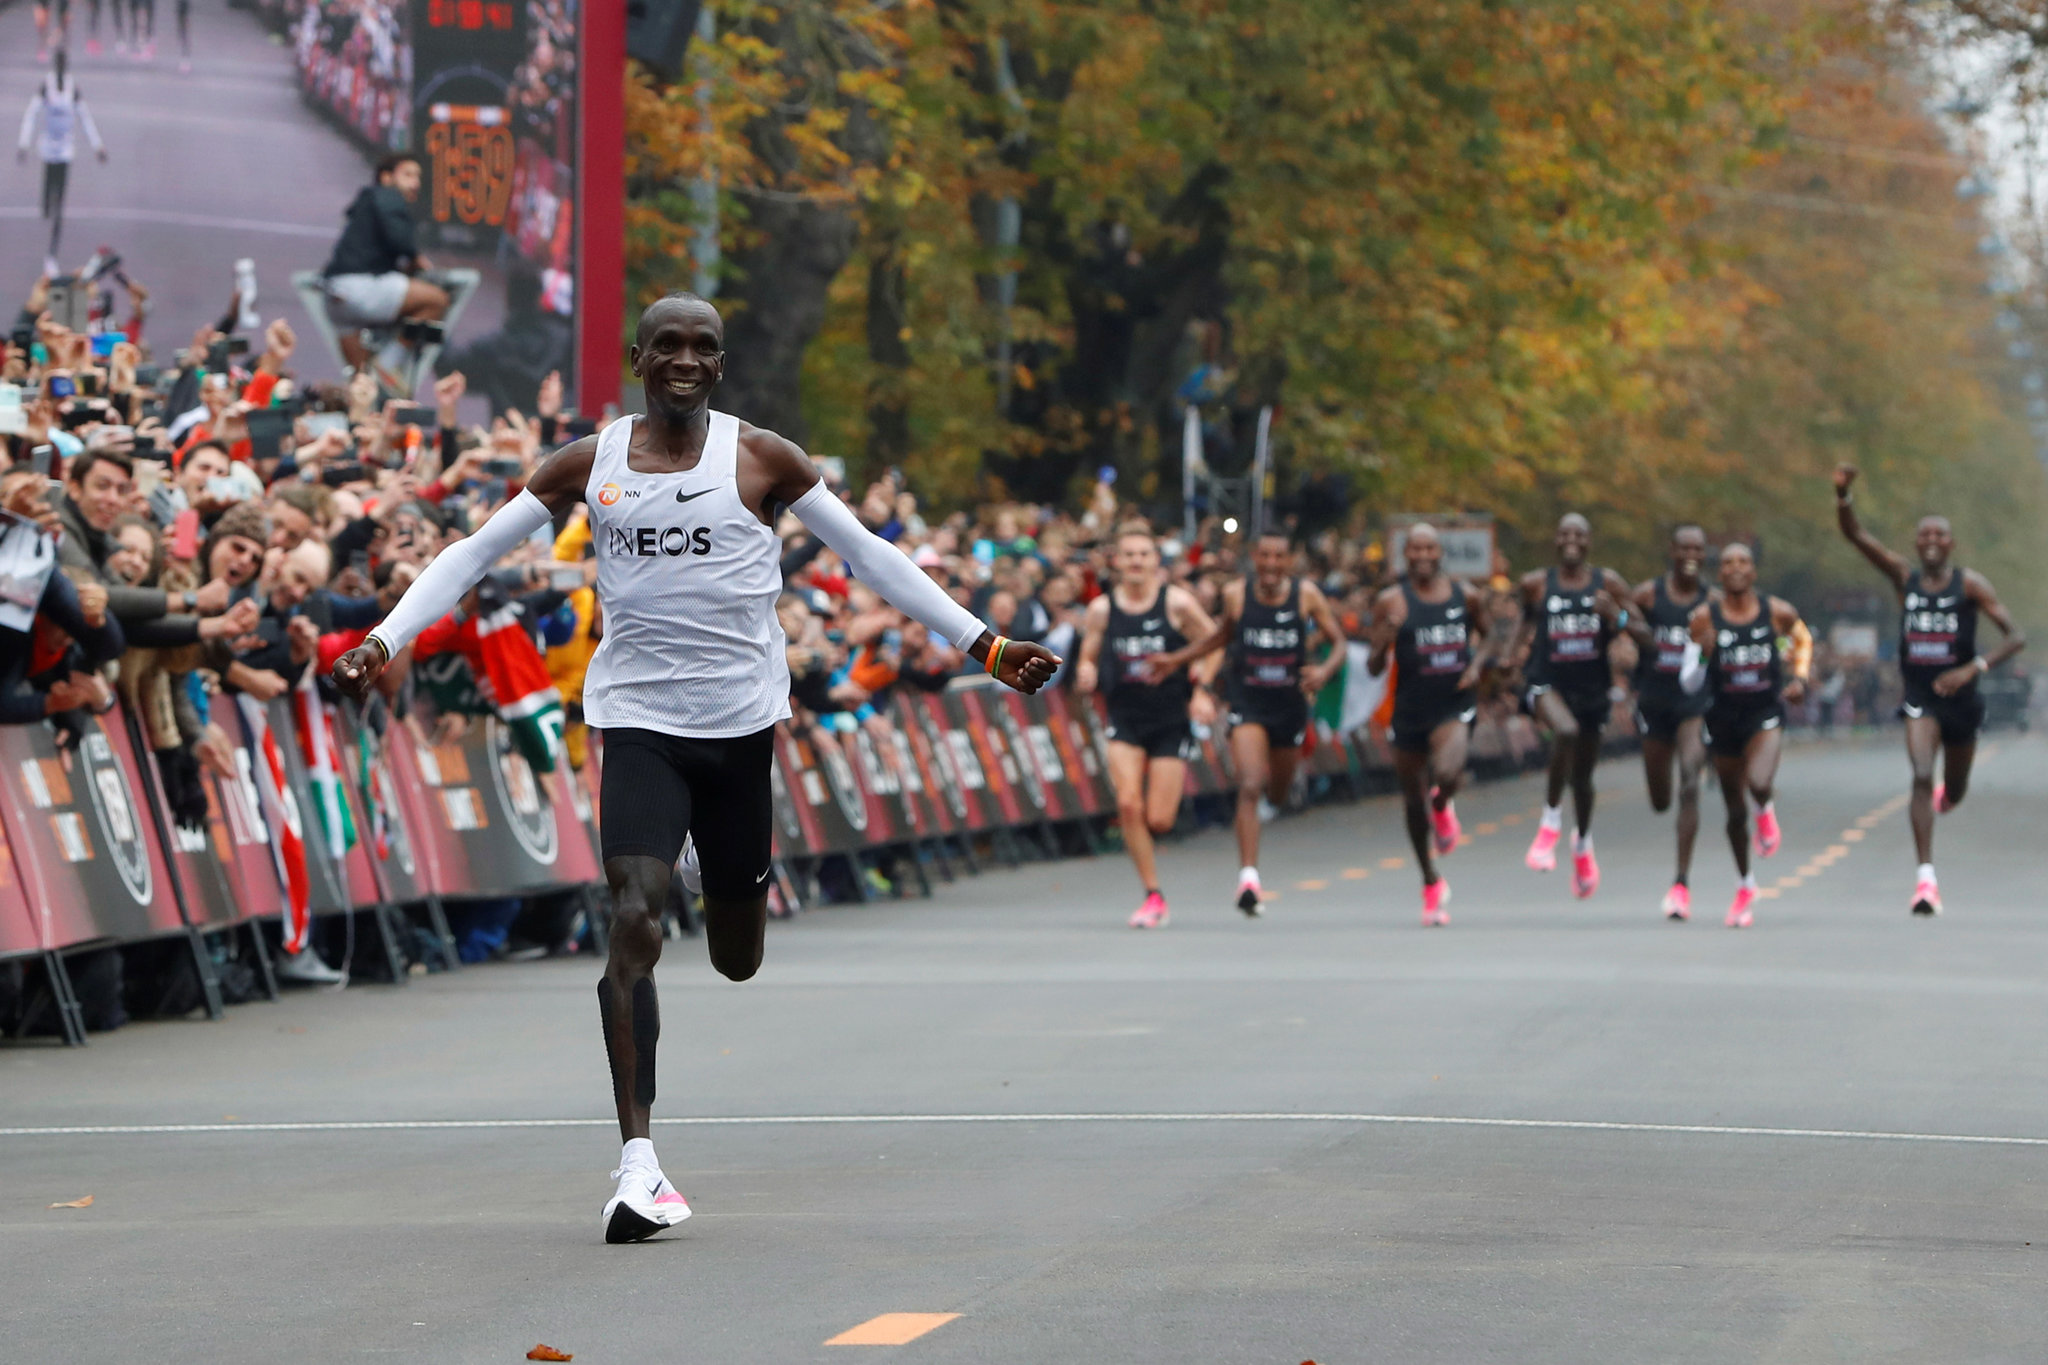 Eliud Kipchoge when he won the INEOS 1:59 challenge in Vienna, Austria on October 12, 2019. |Photo| Courtesy|